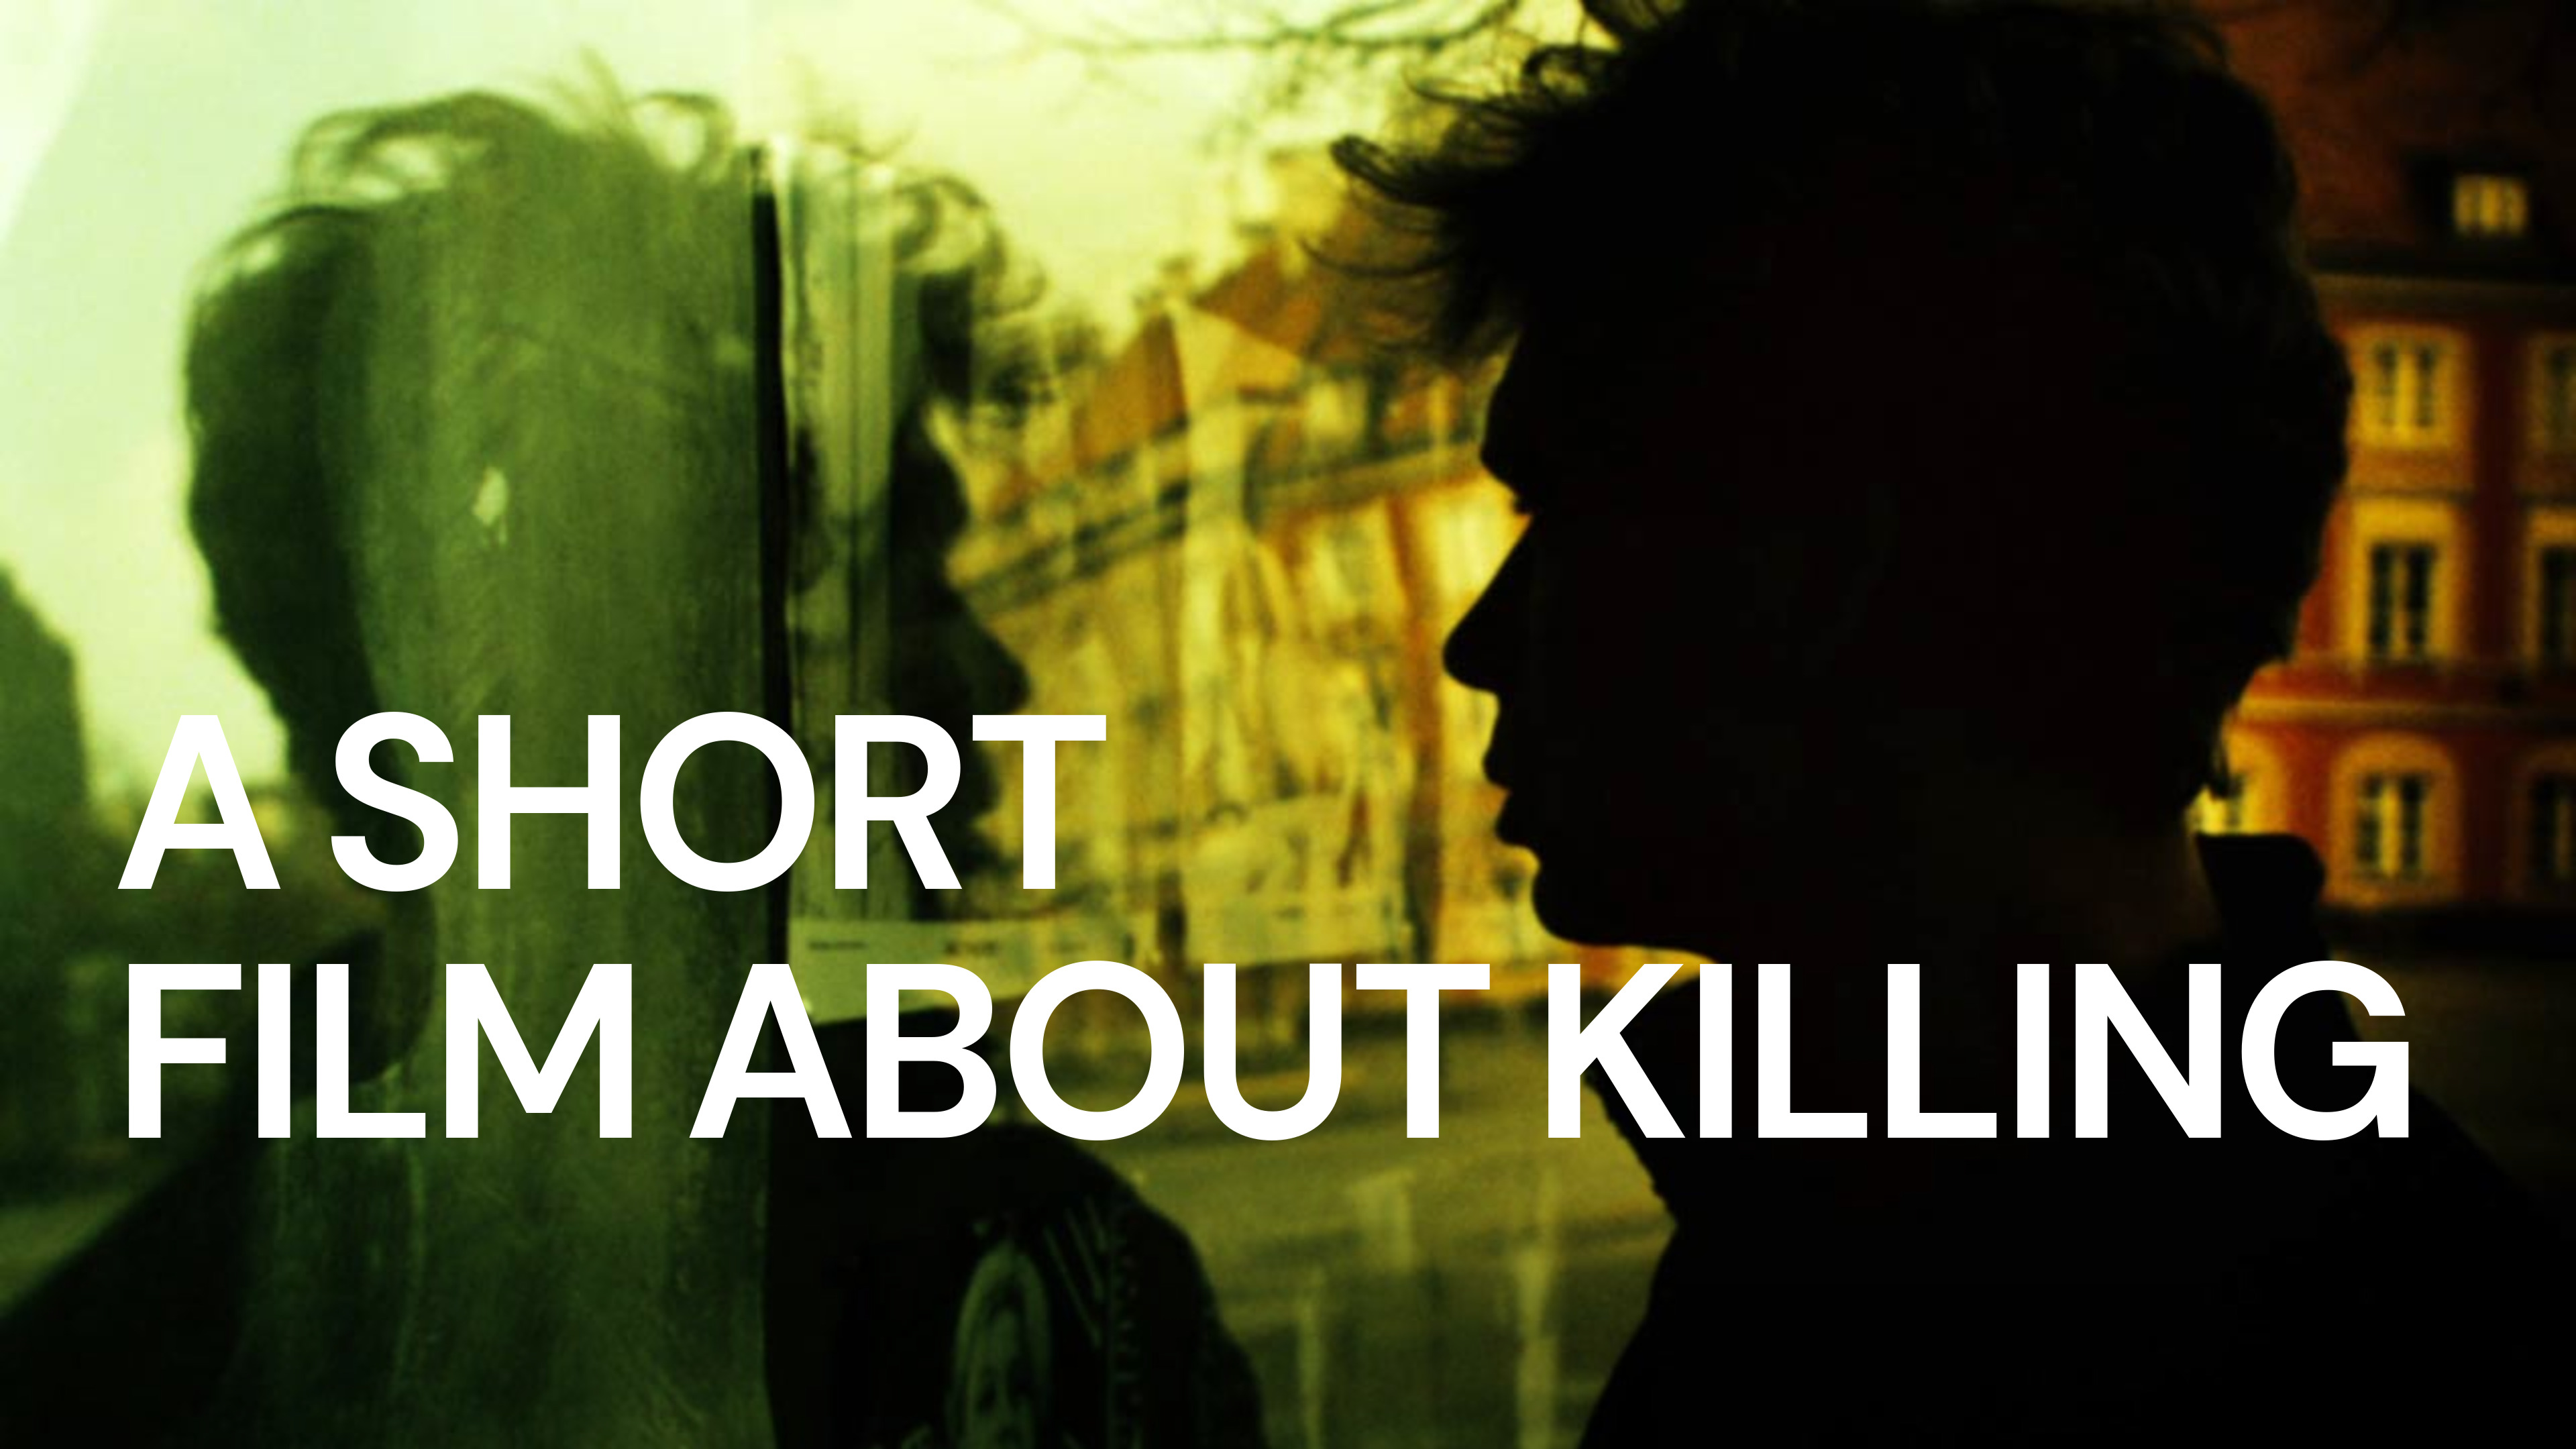 49-facts-about-the-movie-a-short-film-about-killing